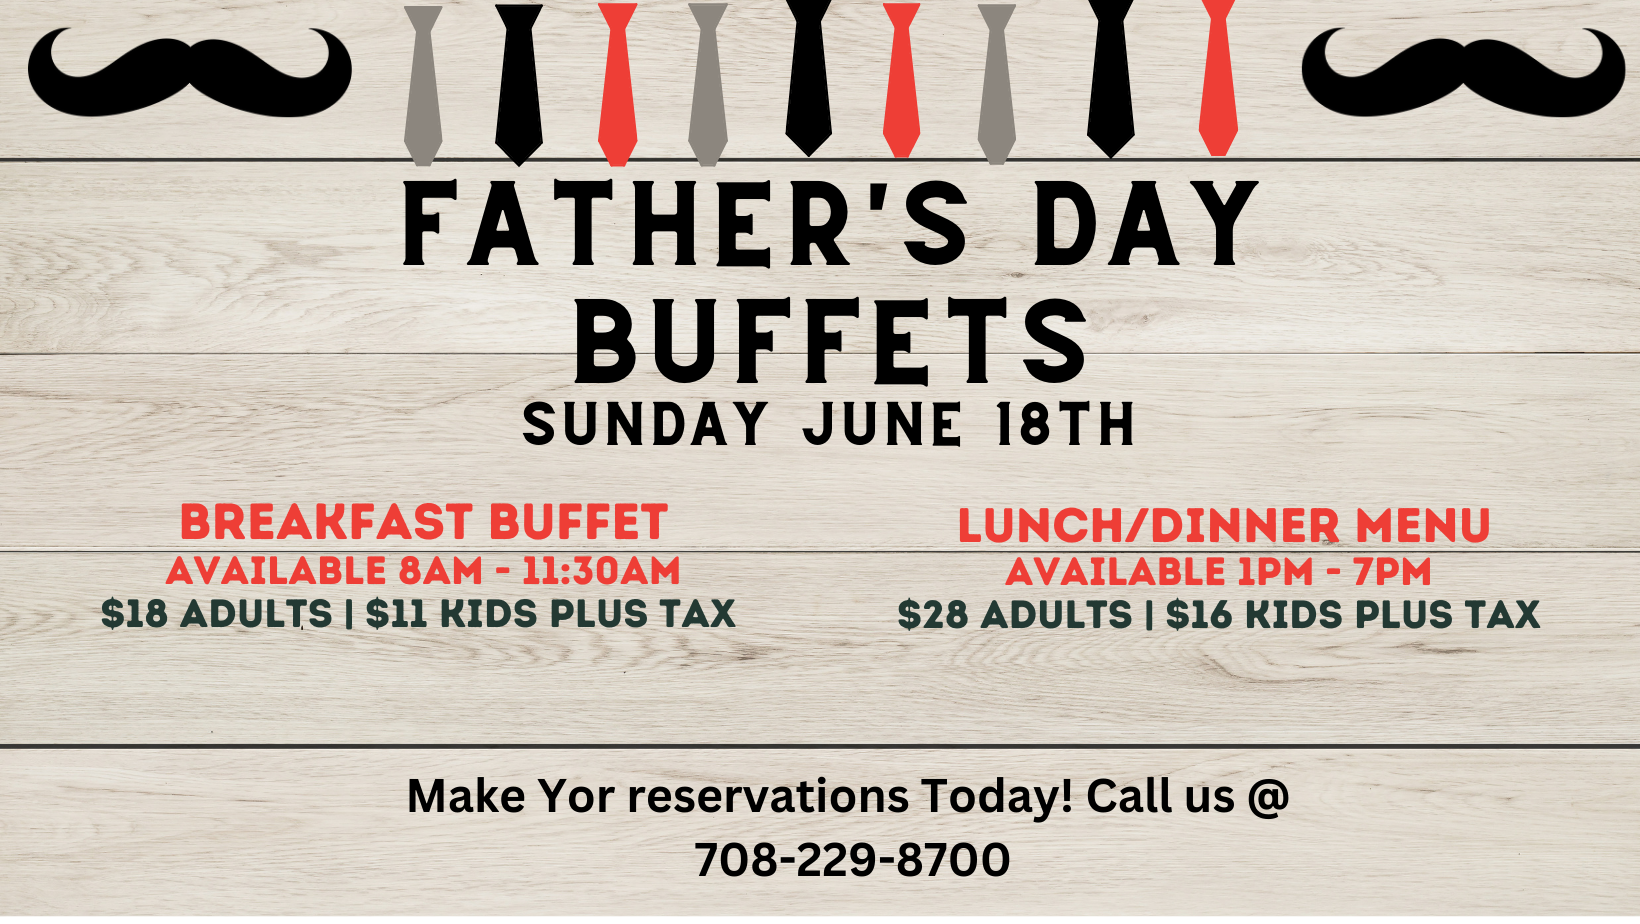 Chuck's Father's Day Buffets